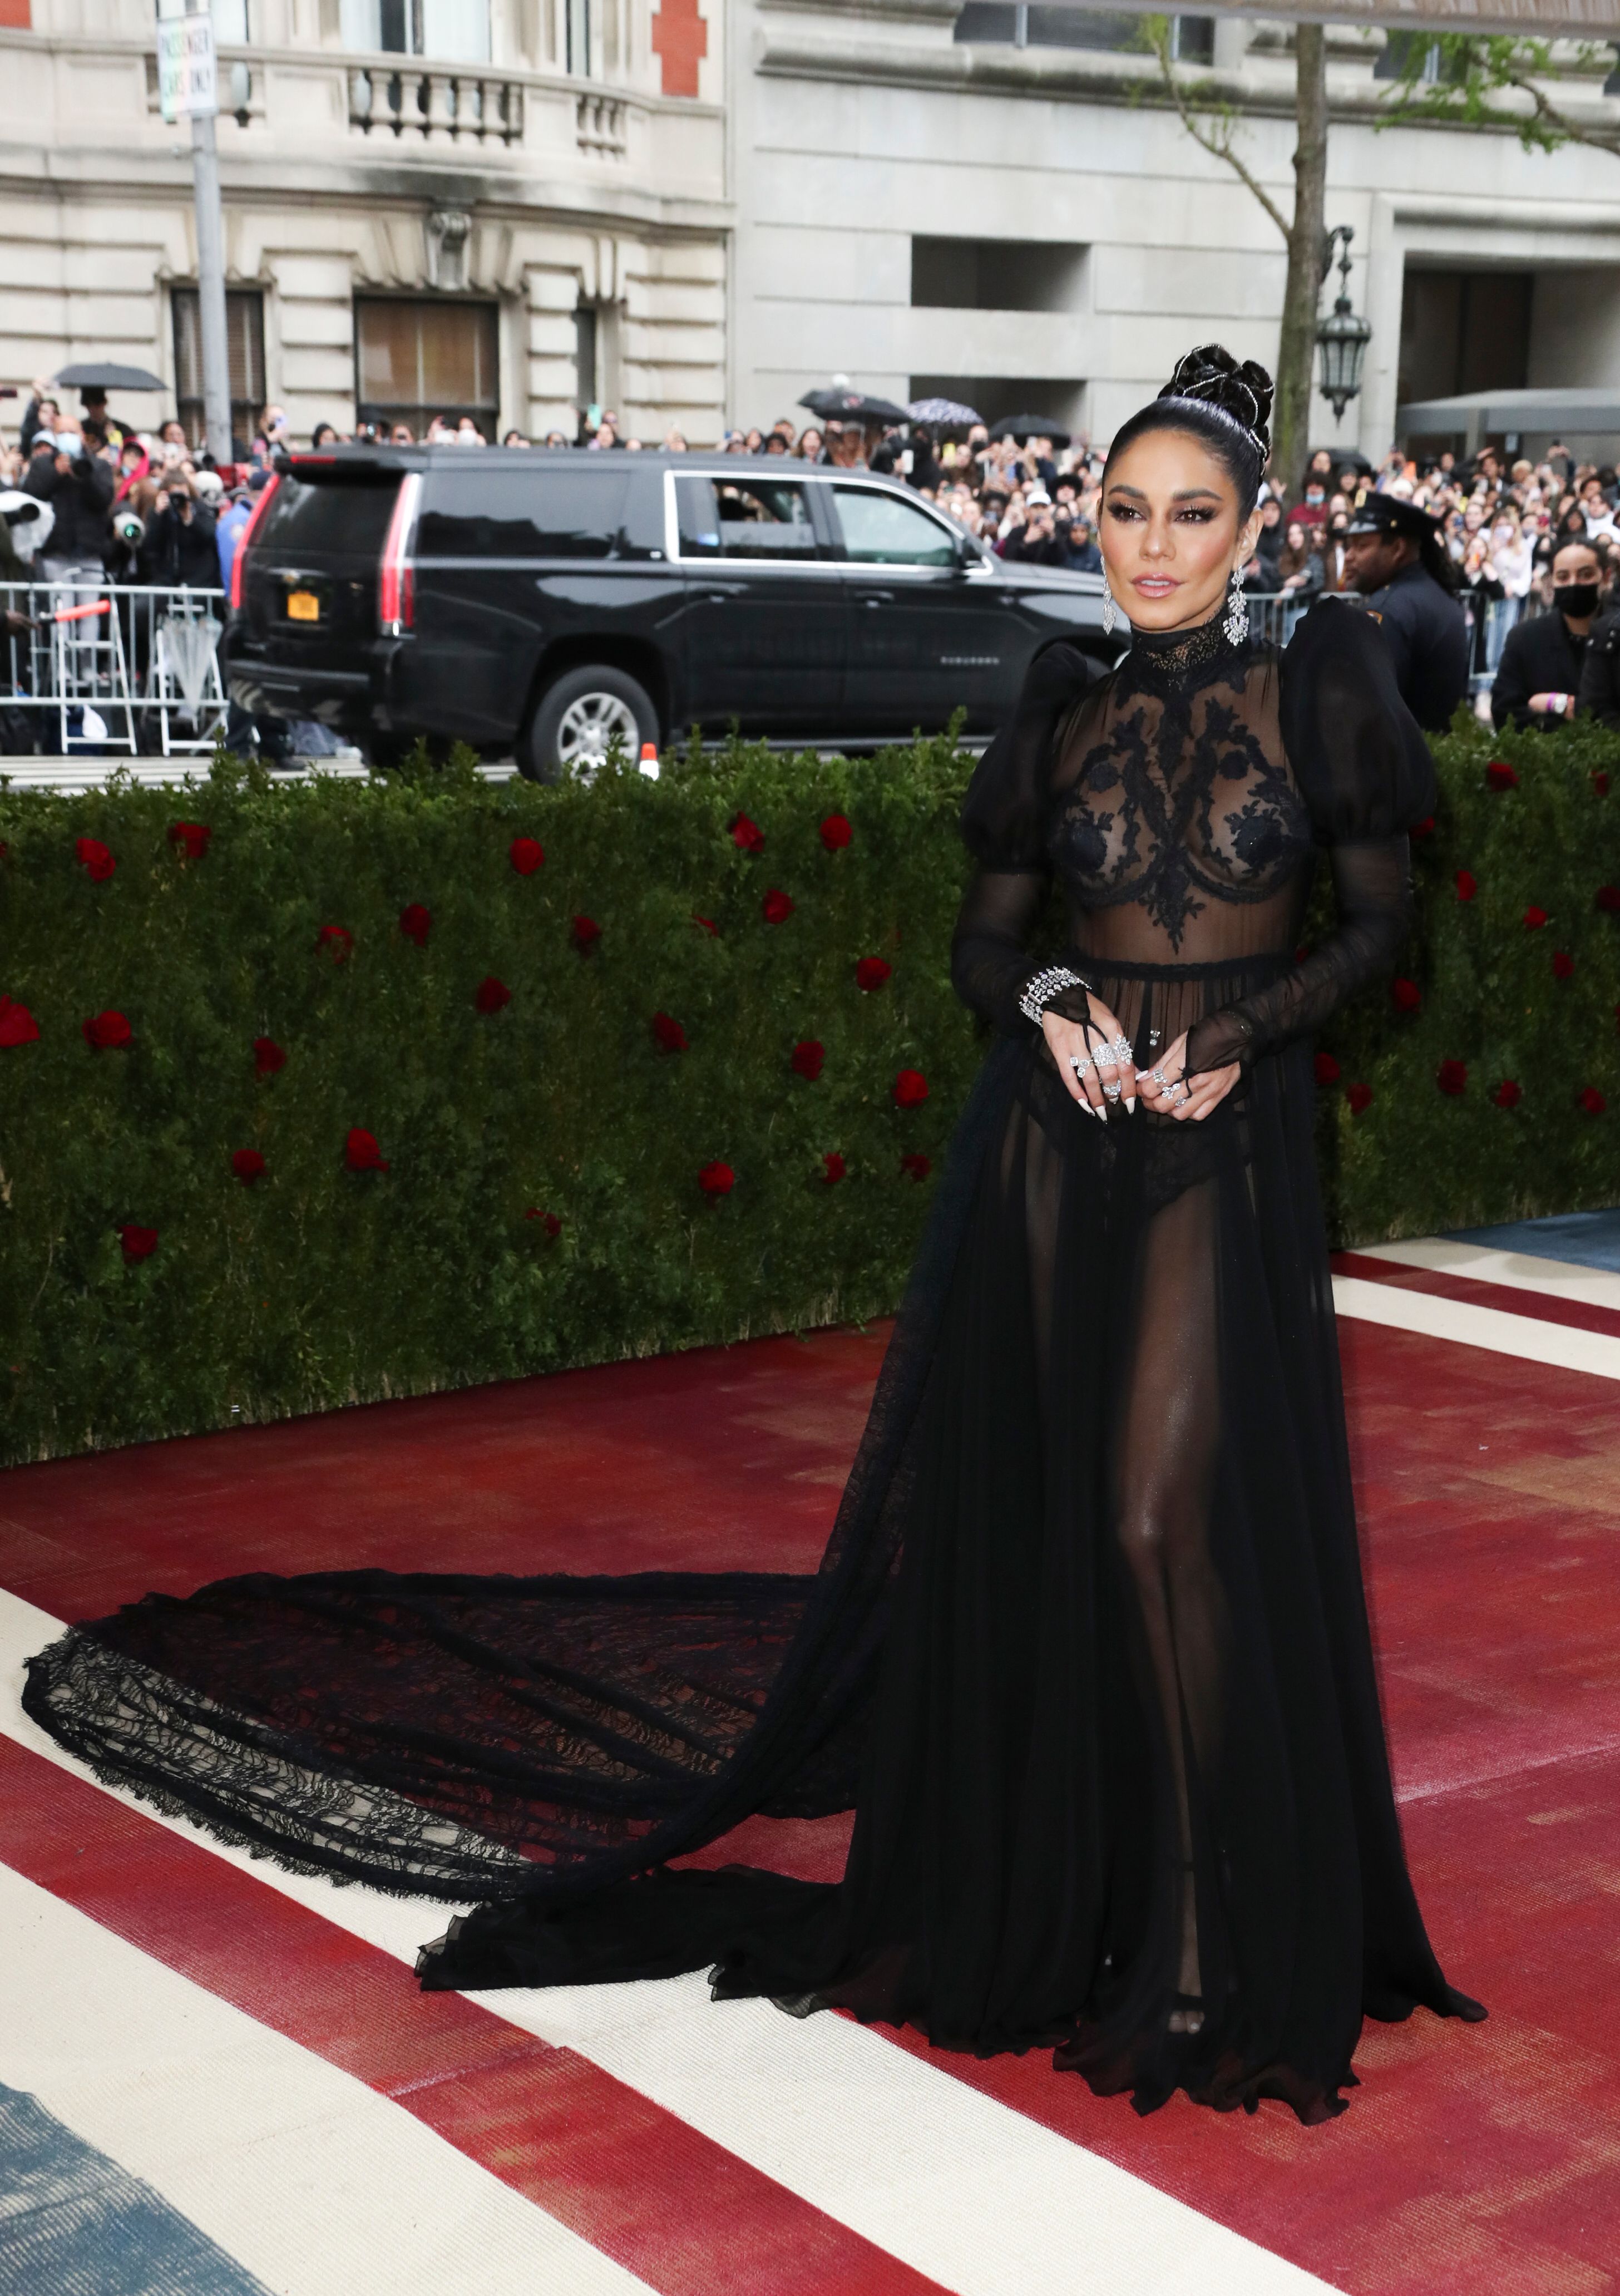 Met Gala 2022: See Young Hollywood Stars Red Carpet Photos